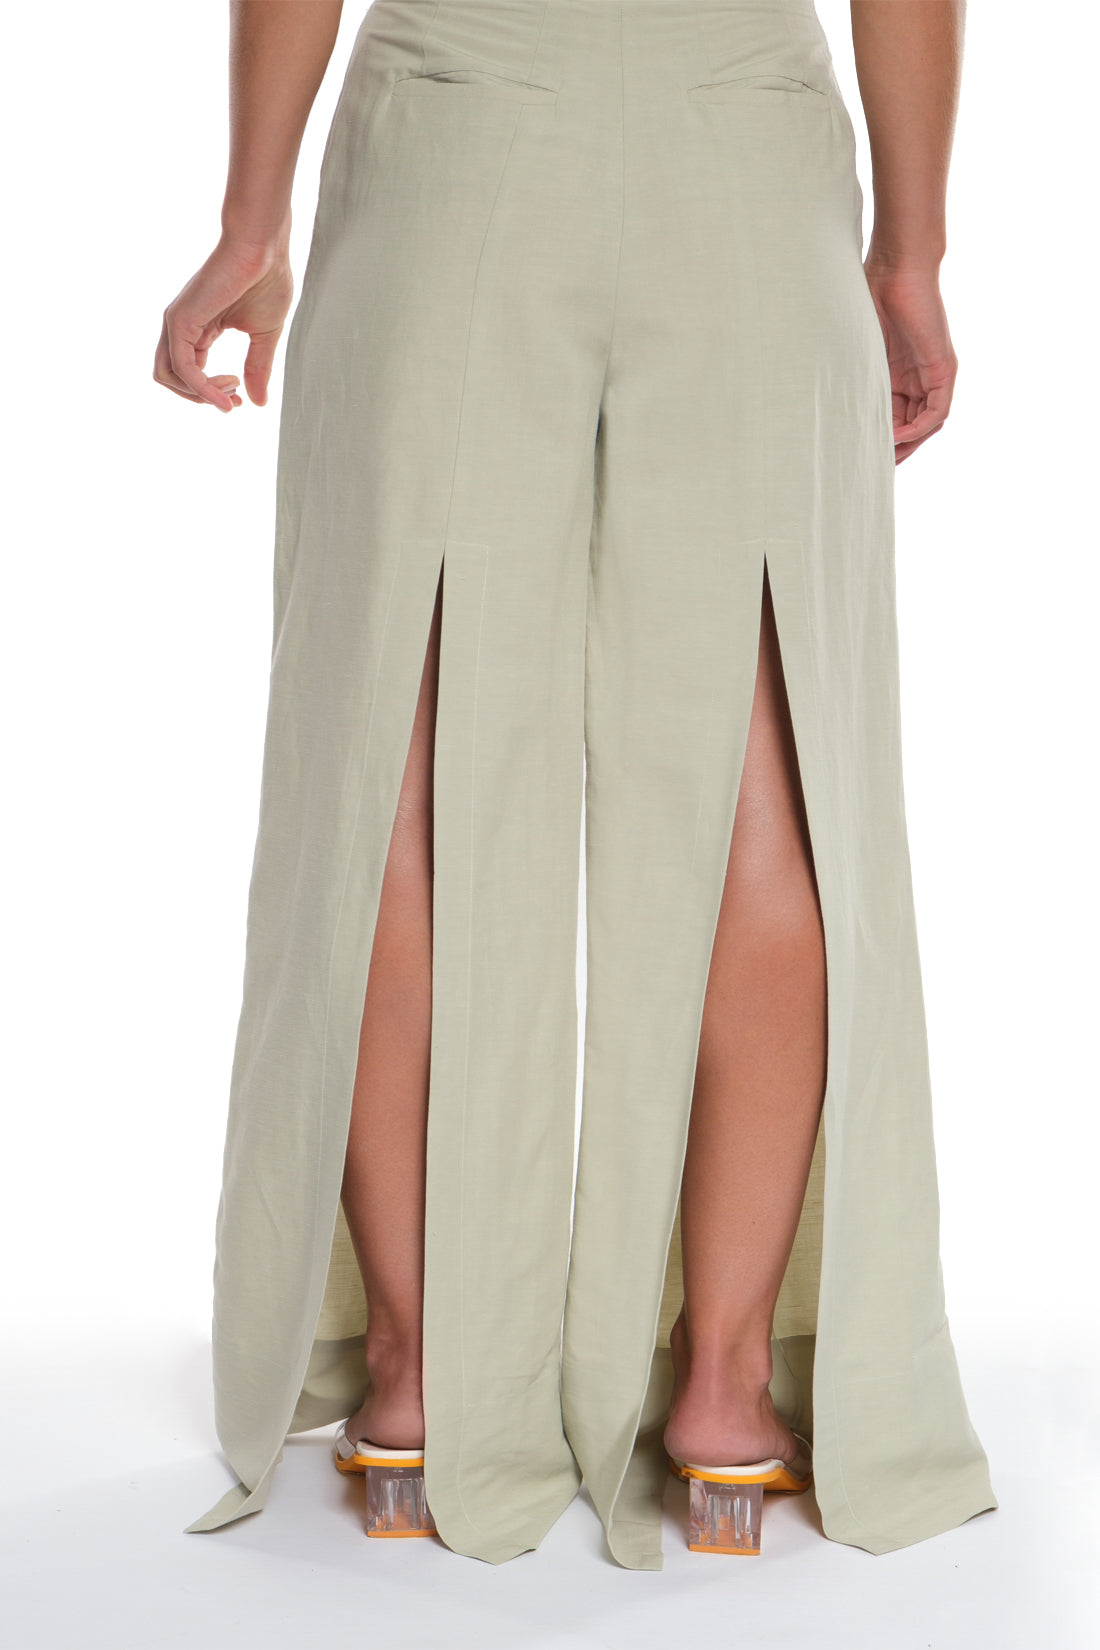 LONG HIGH-WAISTED PANTS WITH CUTTINGS AND POCKETS ON THE BACK.